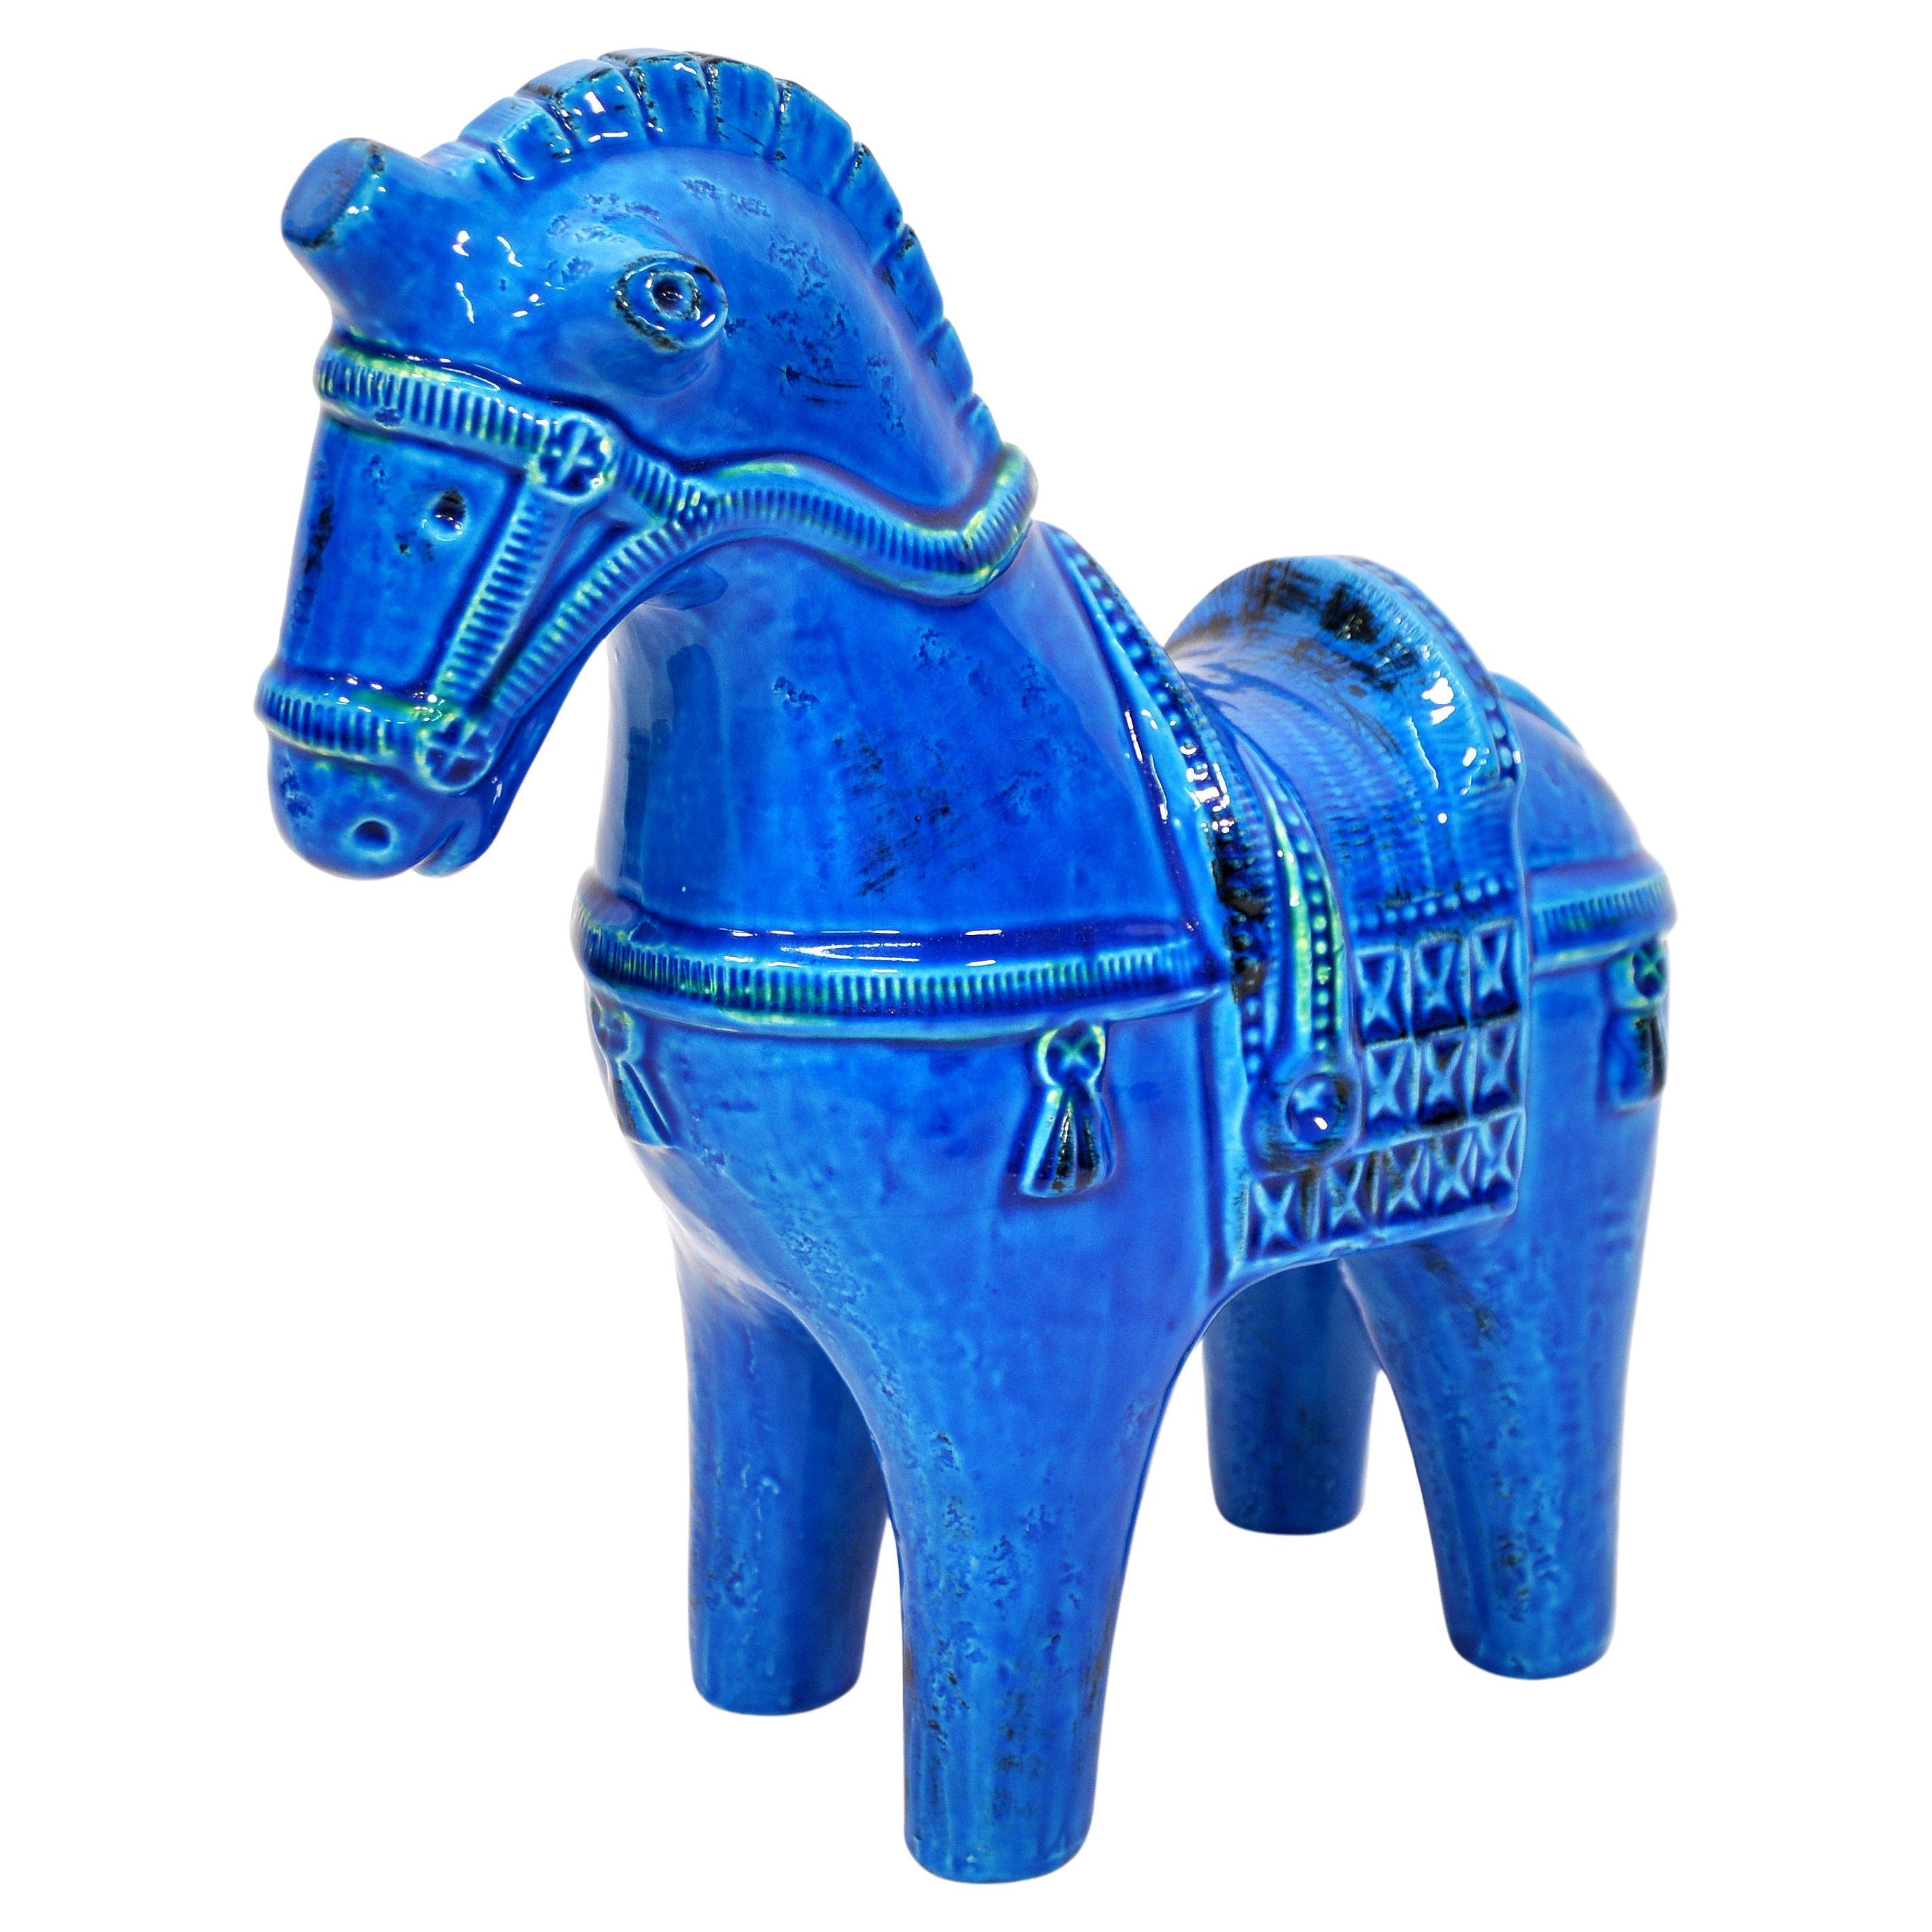 Tall Italian handmade ceramic horse sculpture in the vibrant signature blue of Aldo Londi's iconic art pottery collection Rimini Blu, originally designed in 1959 for Bitossi Ceramiche and imported by Raymor in the 1960s. The deep blue glaze varies